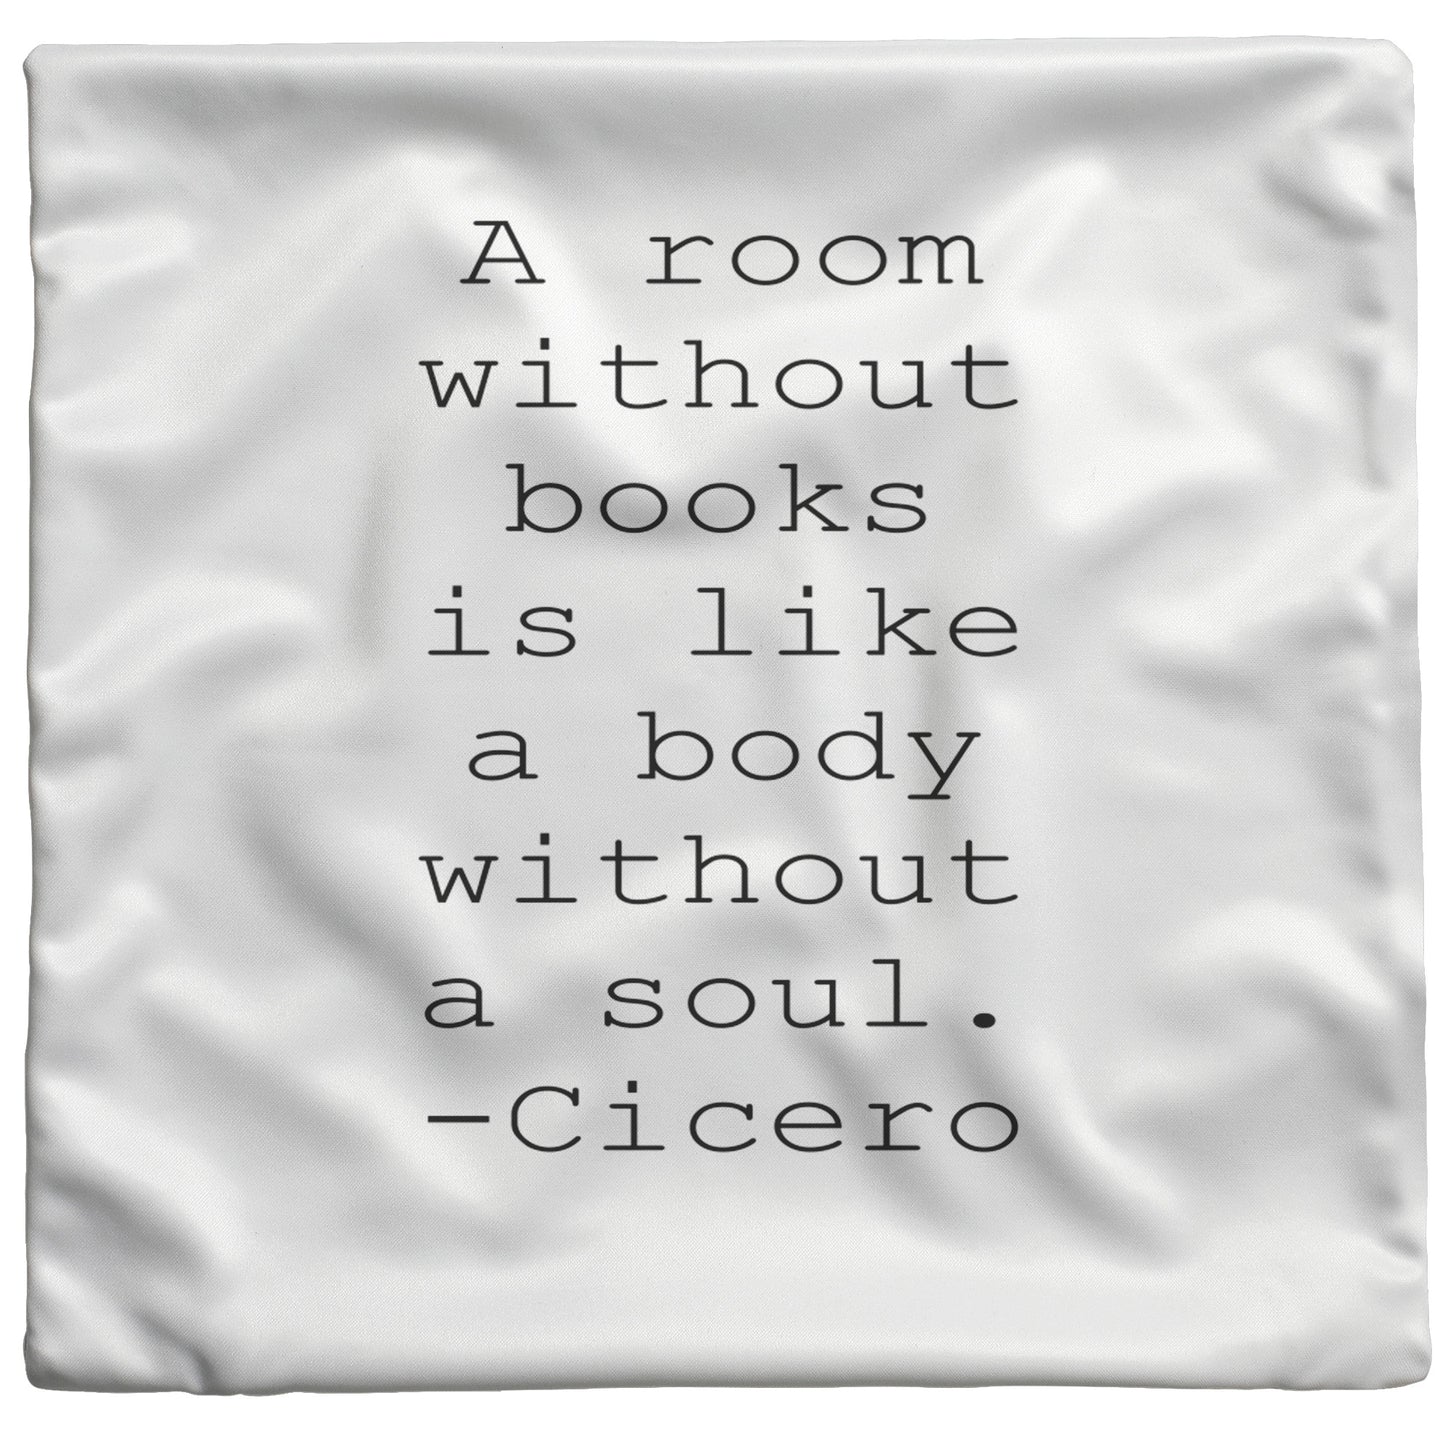 A Room Without Books Quote Throw Pillow